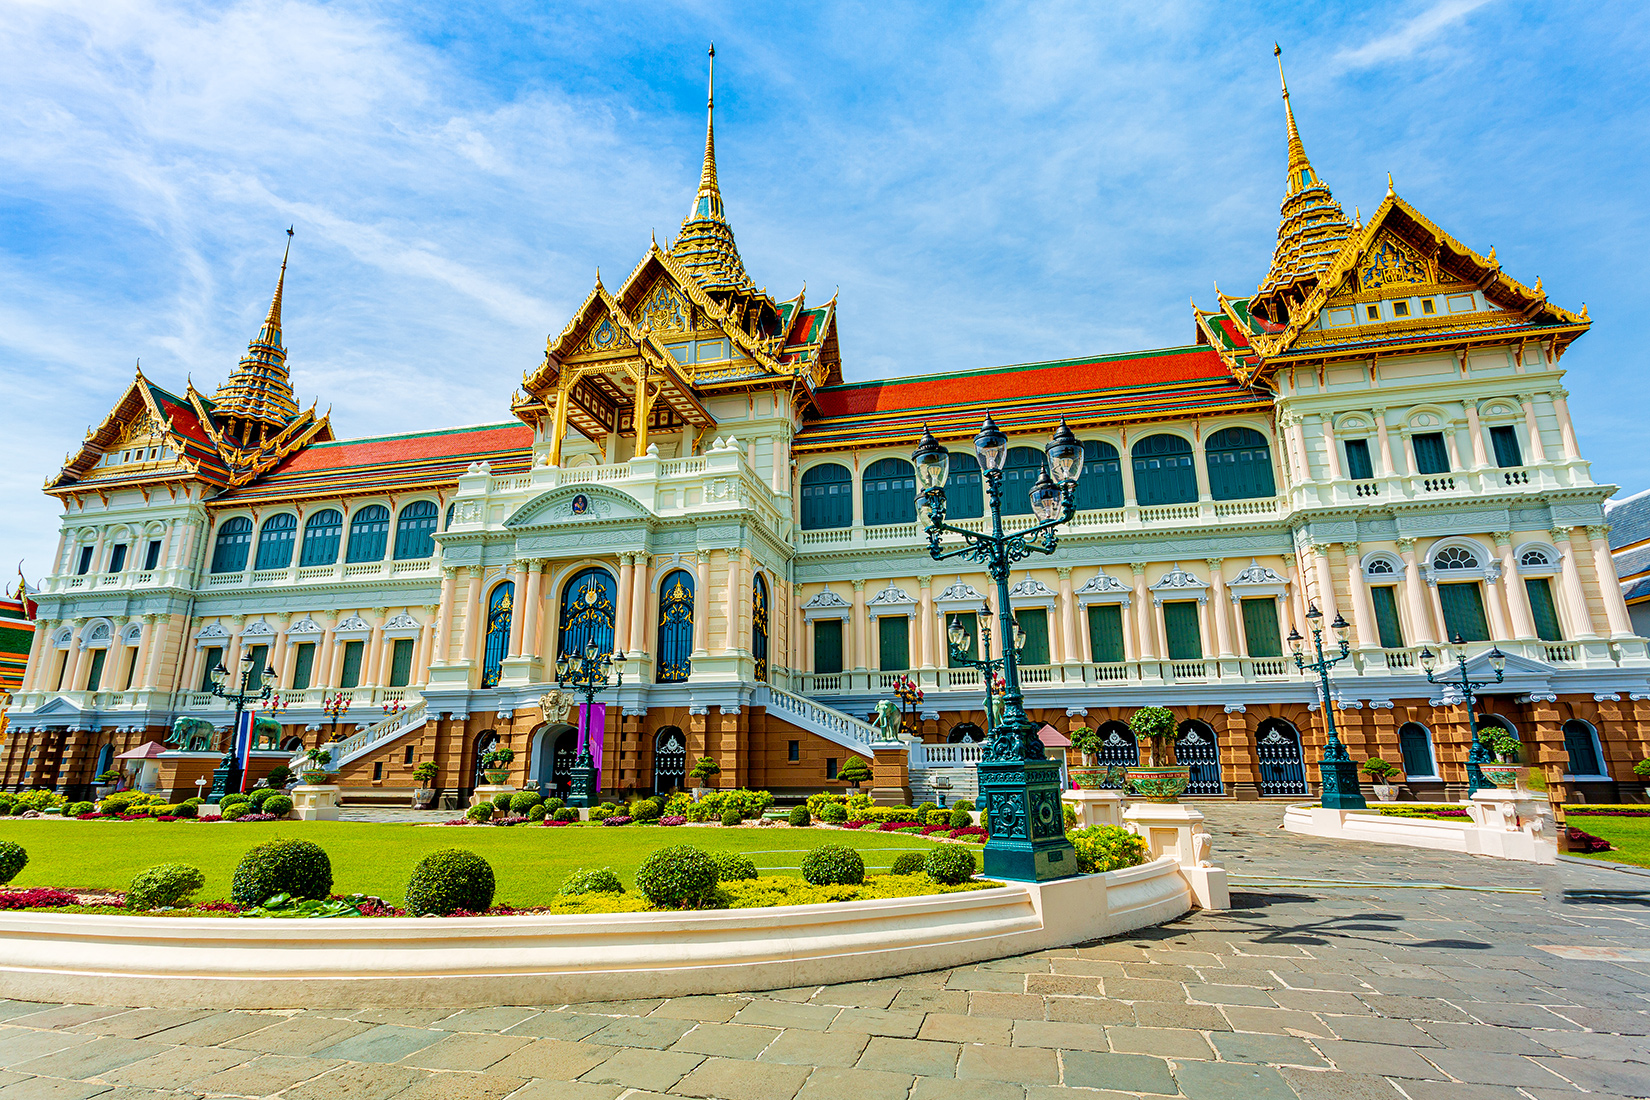 The Grand Palace in Thailand